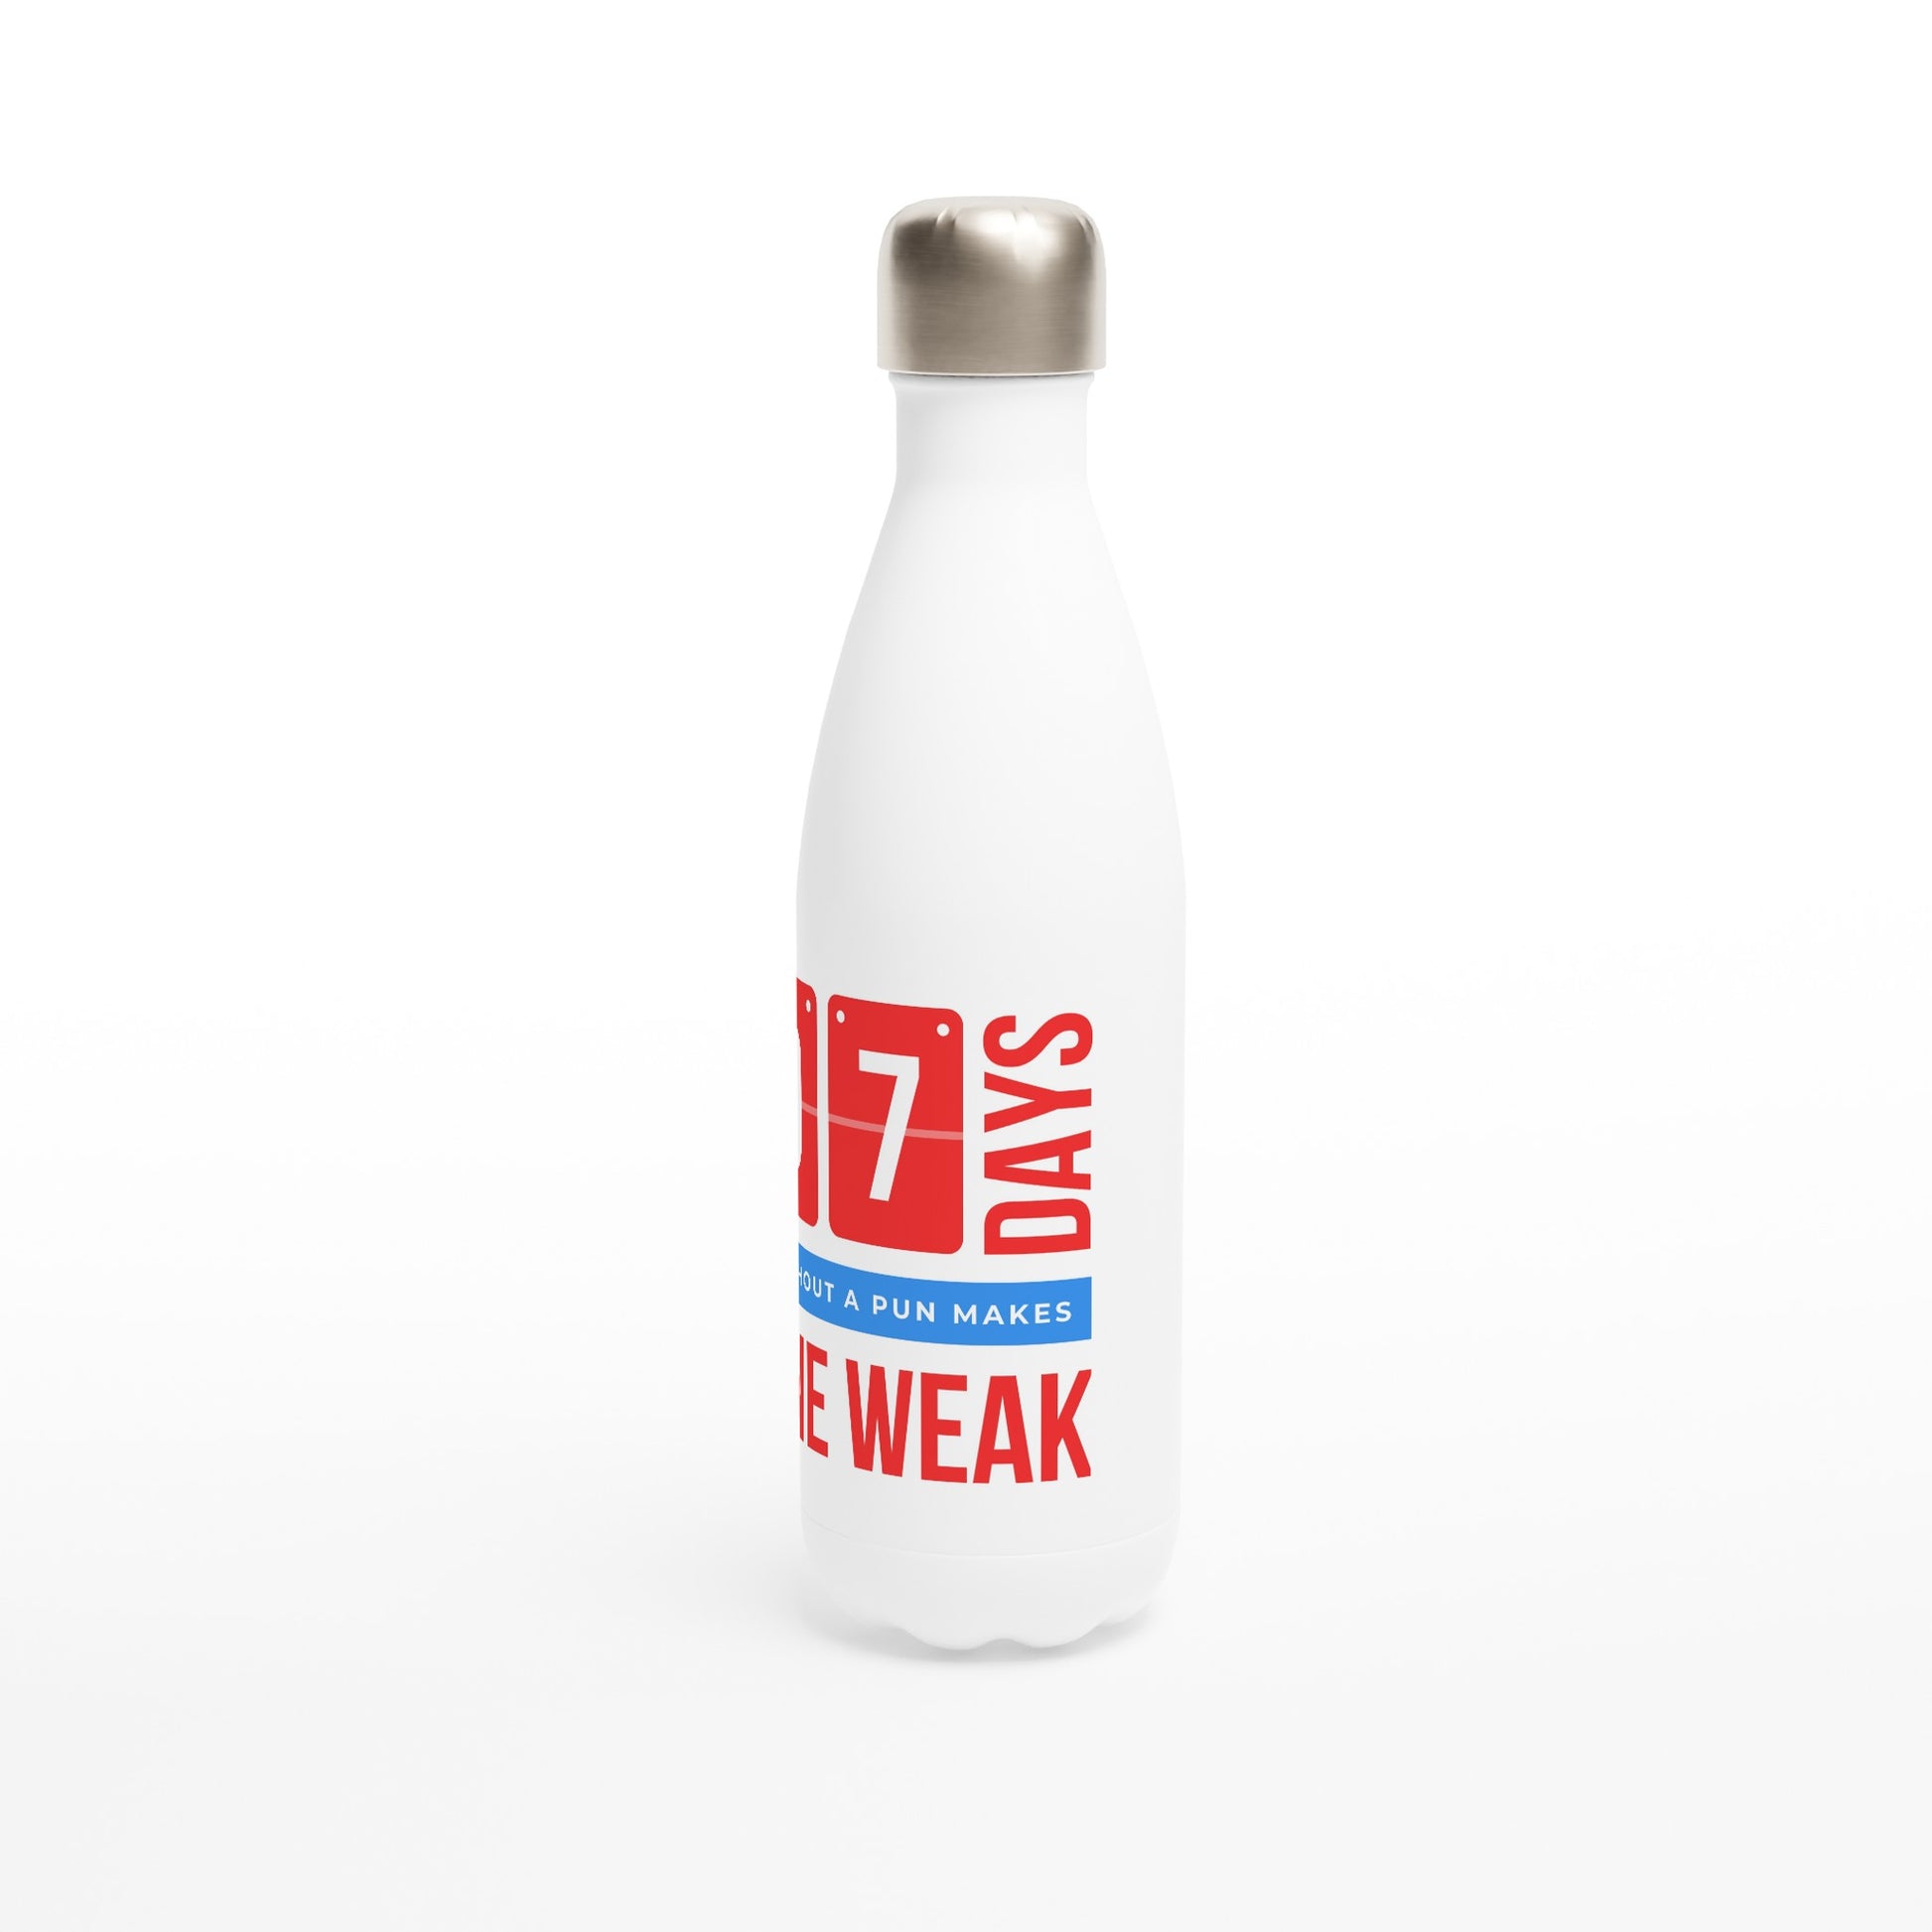 7 Days Without A Pun Makes One Weak - White 17oz Stainless Steel Water Bottle White Water Bottle Funny